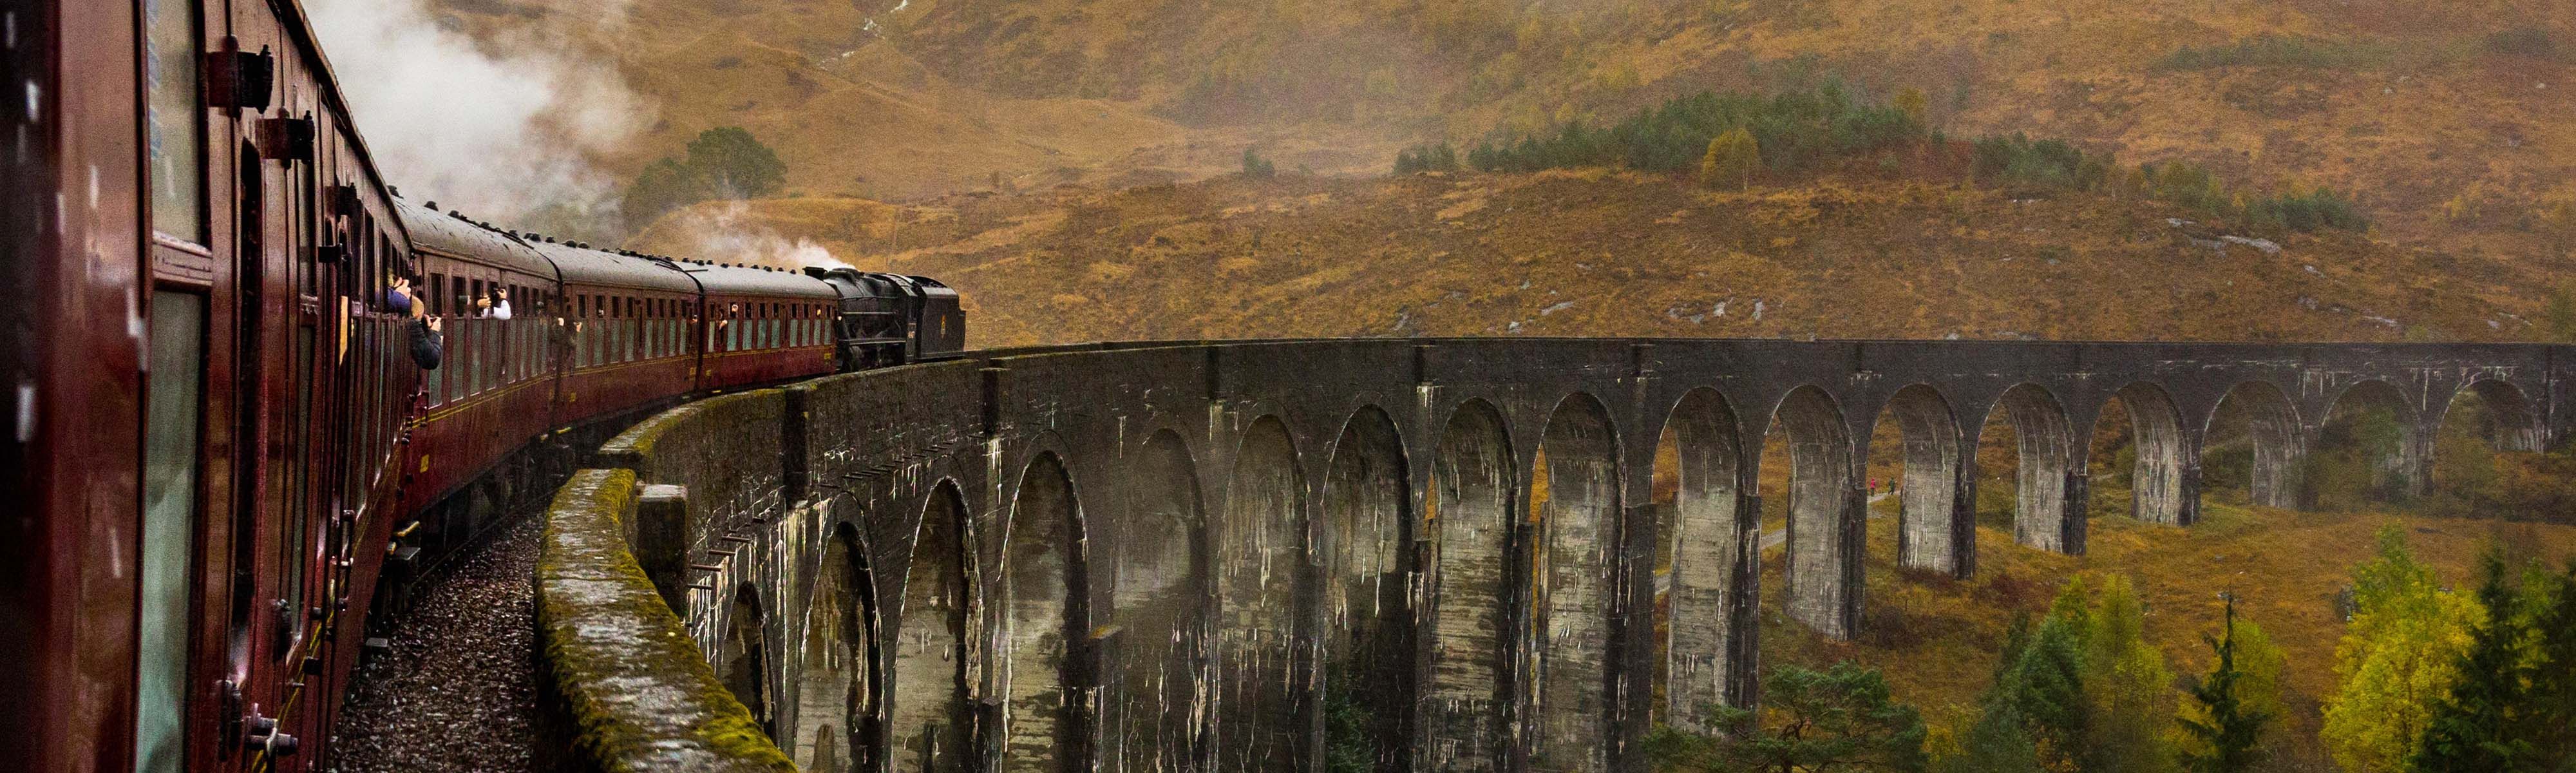 people riding a train in Scotland